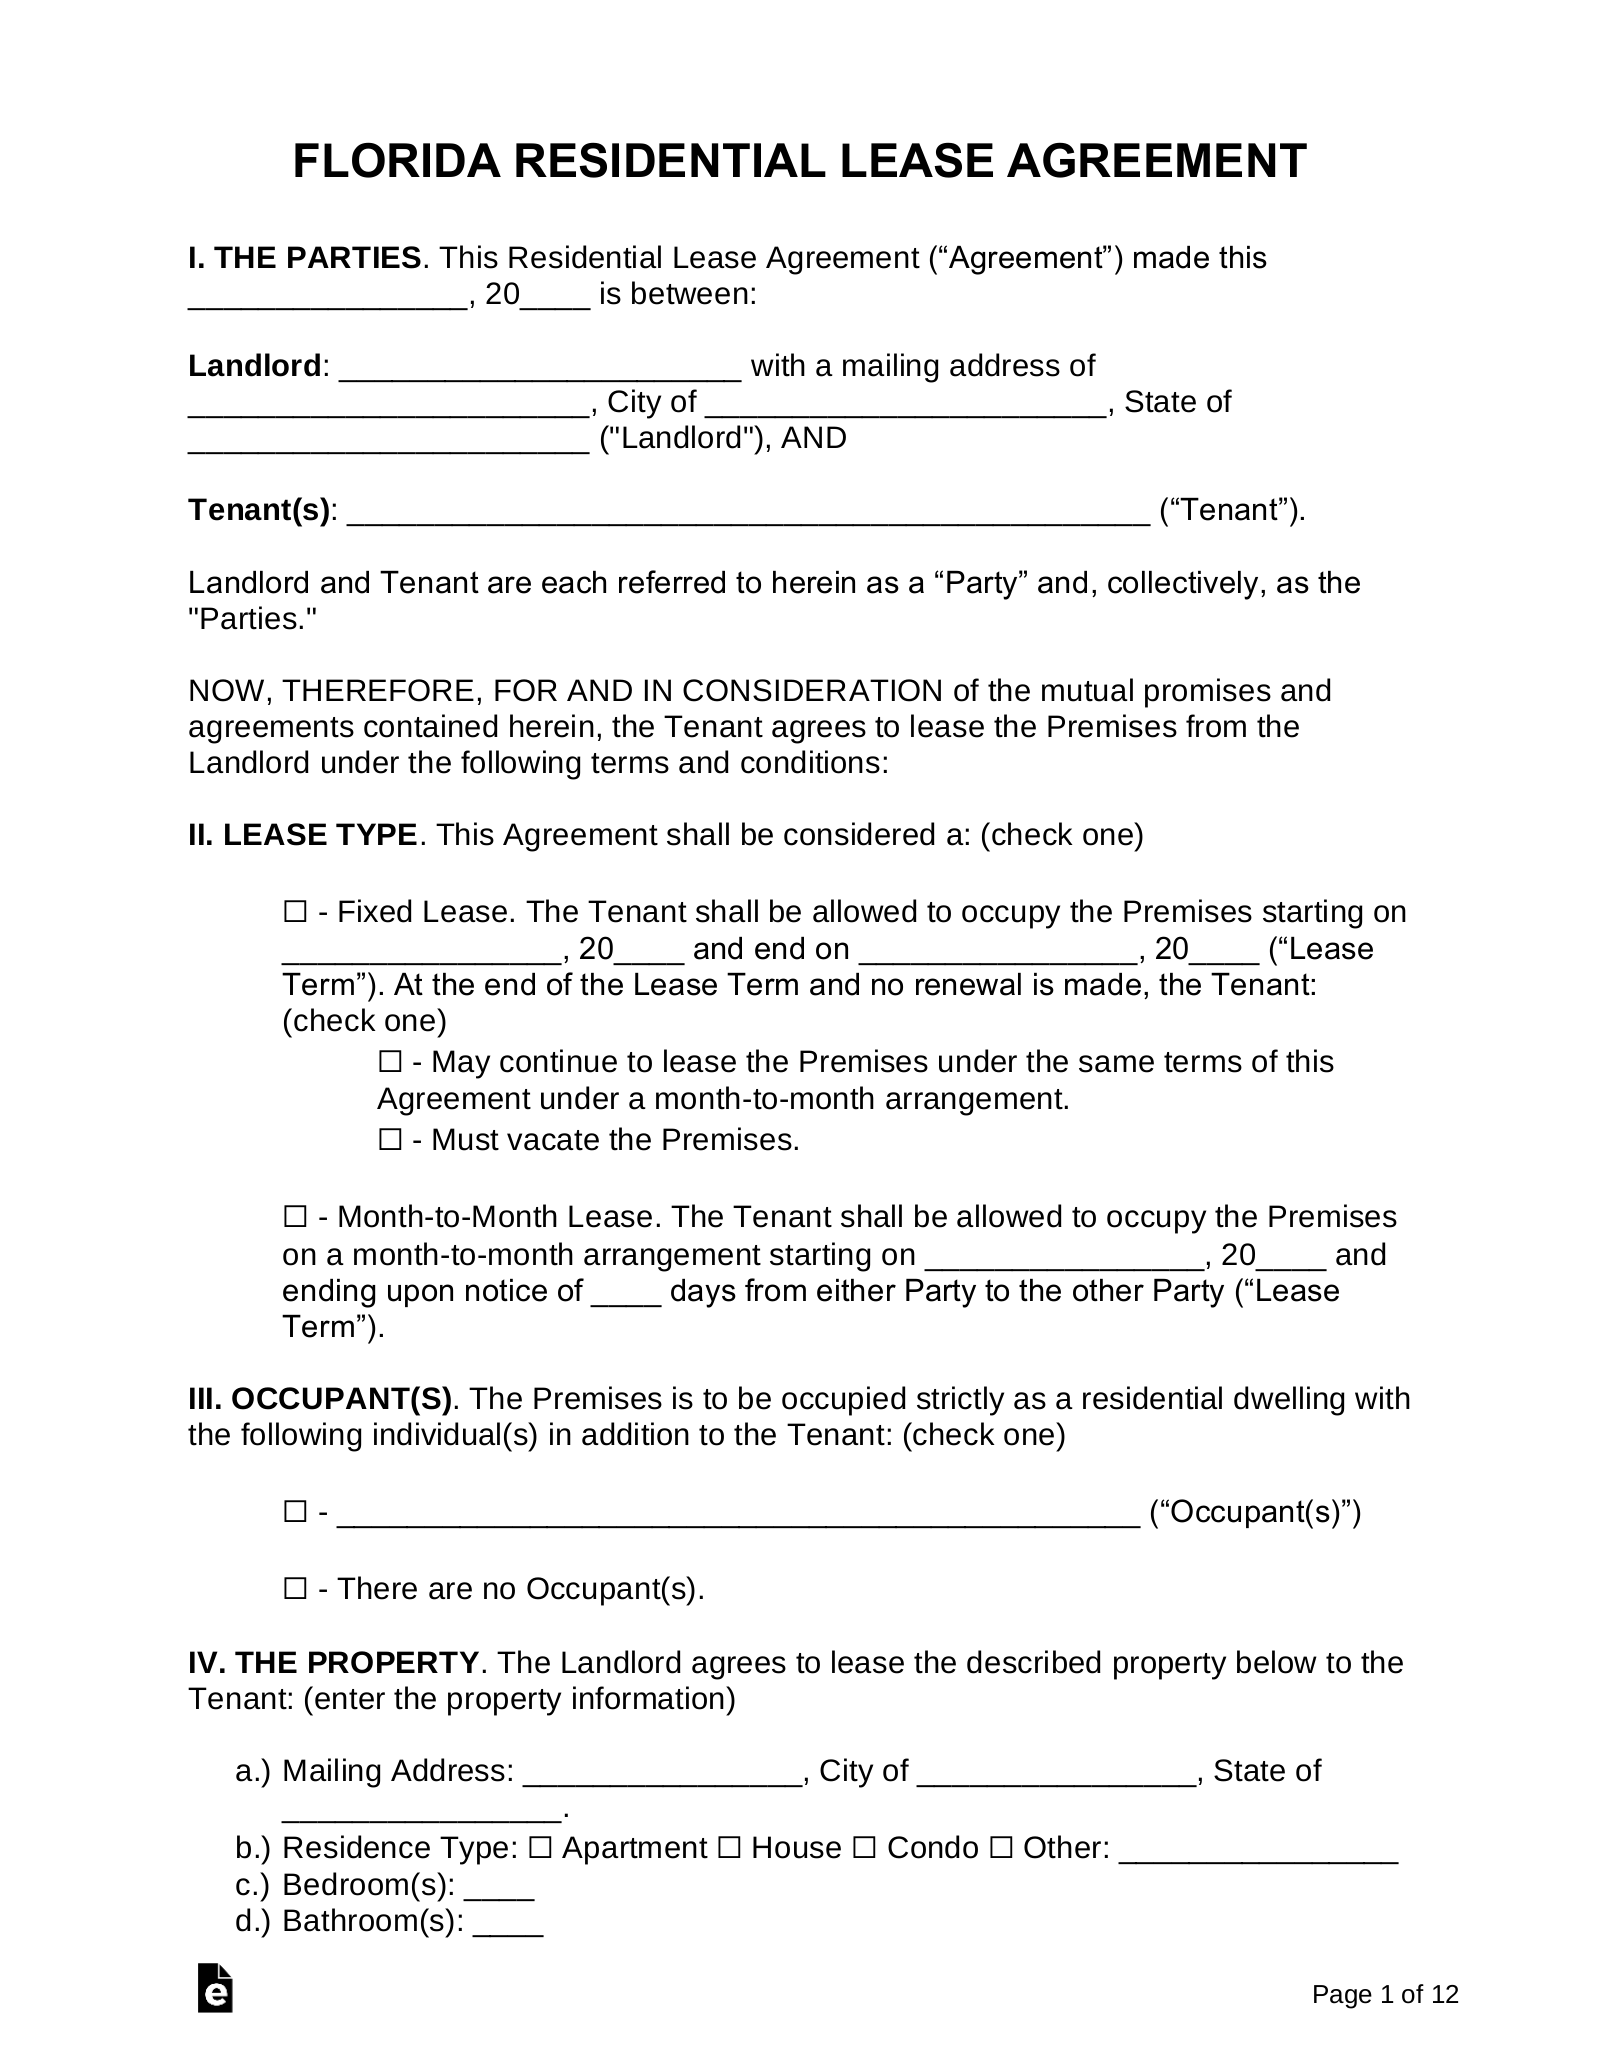 Free Florida Lease Agreement Templates (9) - Pdf | Word – Eforms intended for Free Printable Florida Residential Lease Agreement